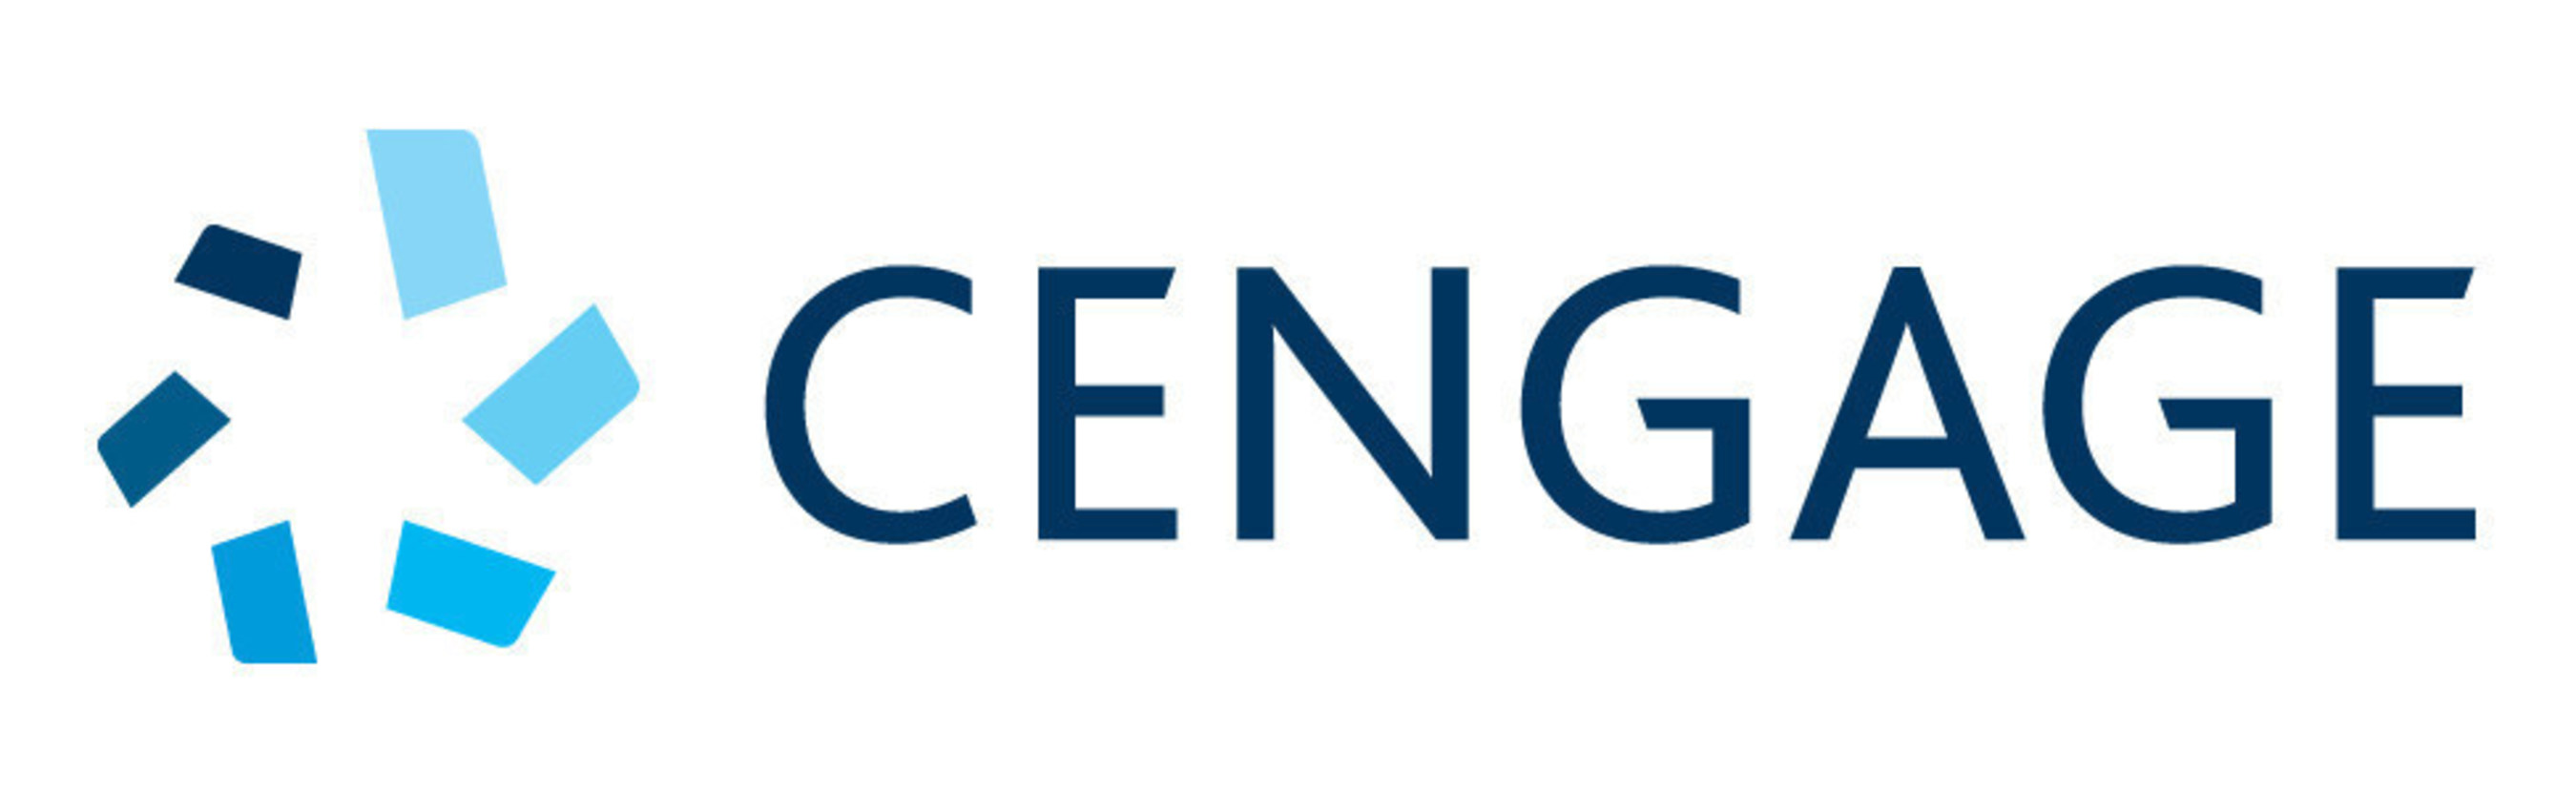 Image result for cengage